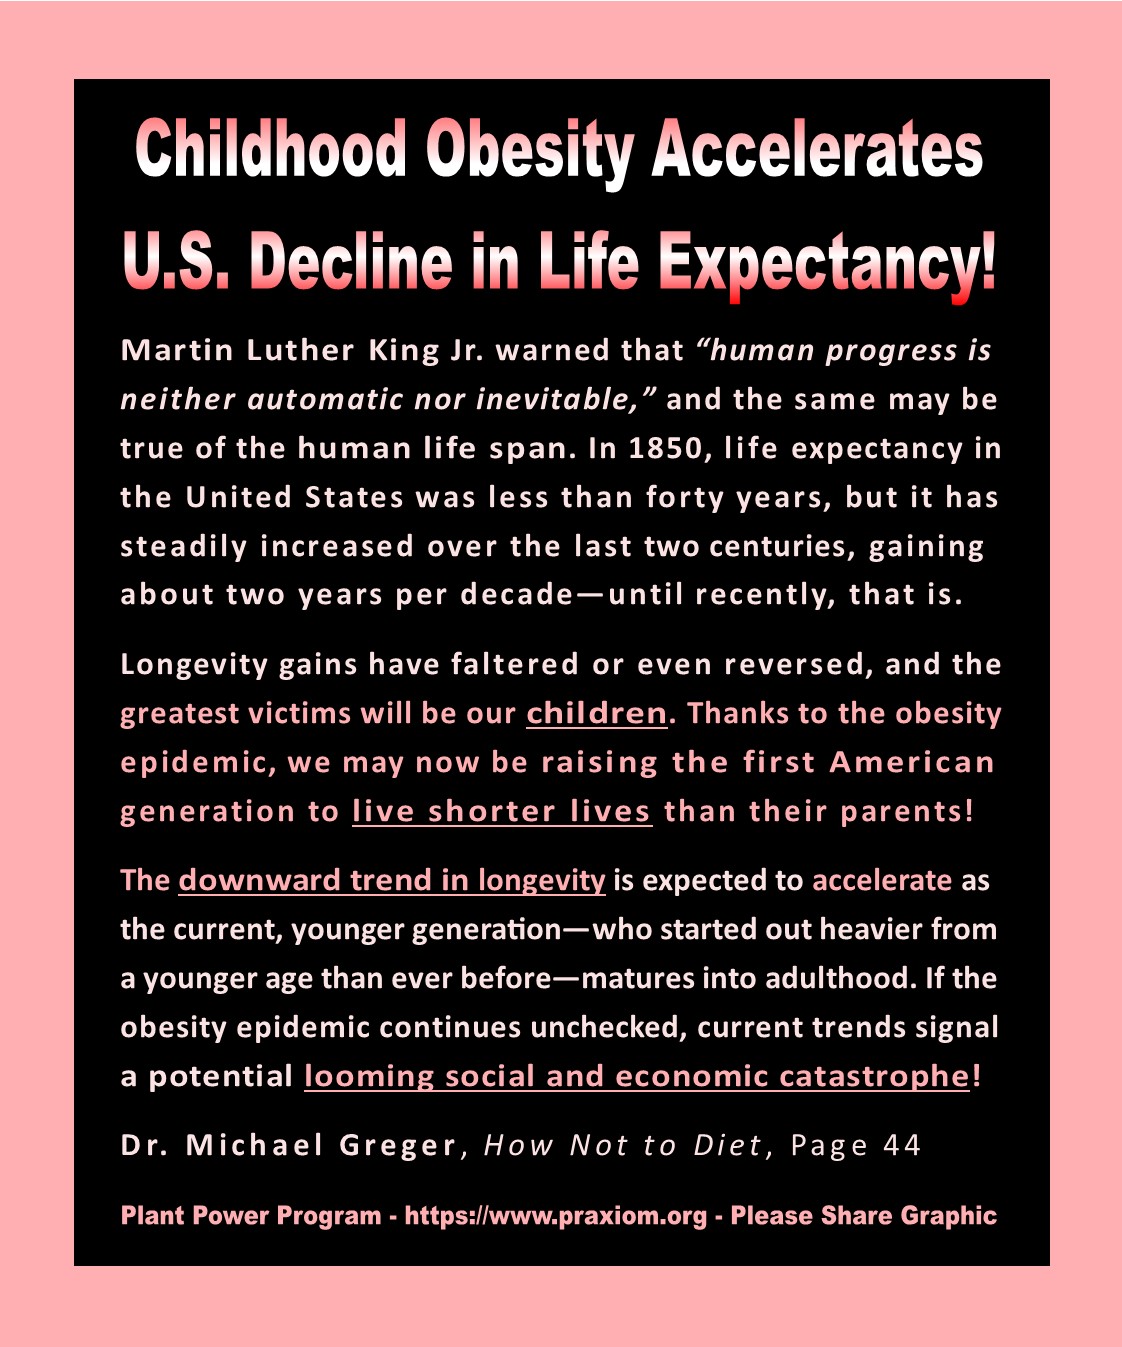 Childhood Obesity Accelerates Decline in US Life Expectancy - Dr. Michael Greger